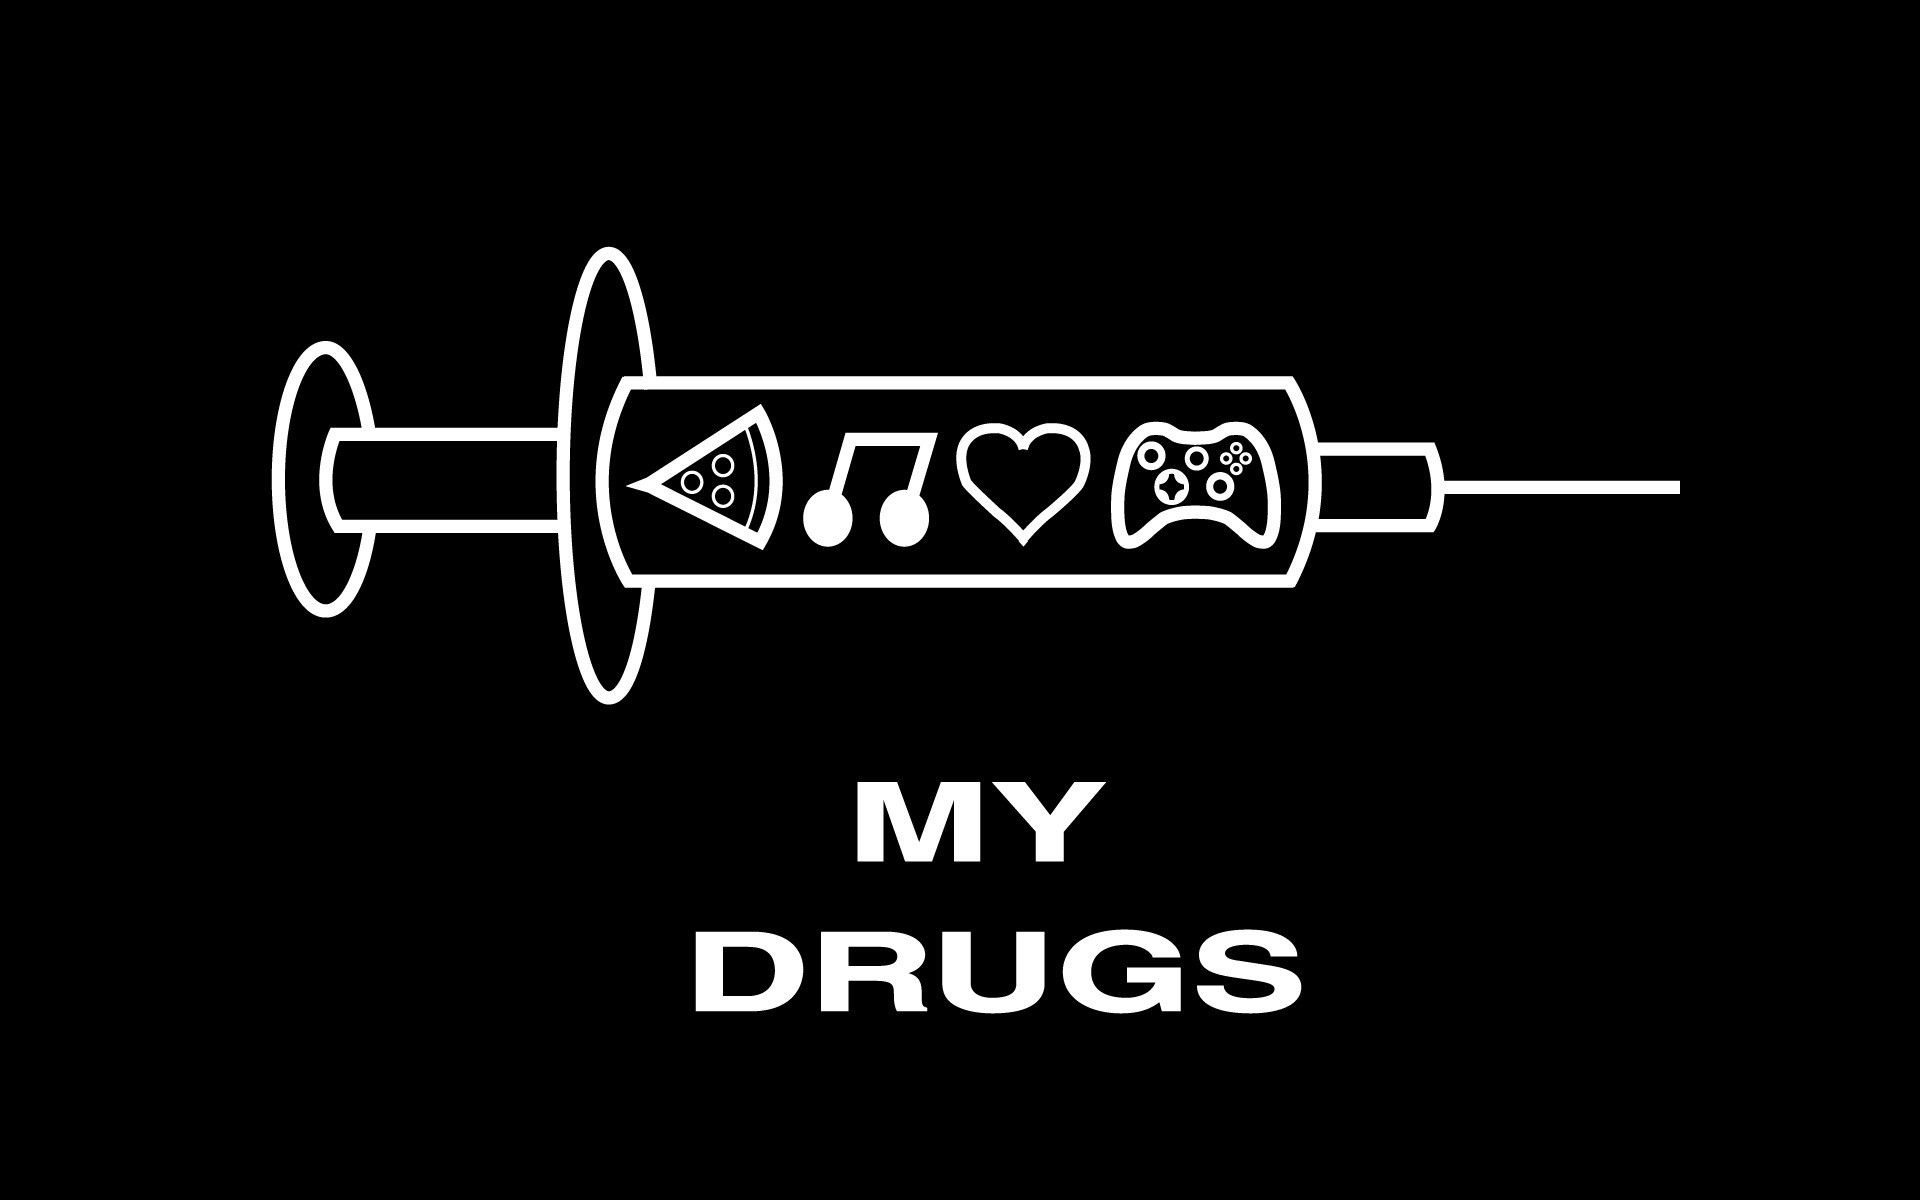 My daily drugs wallpaperx1200